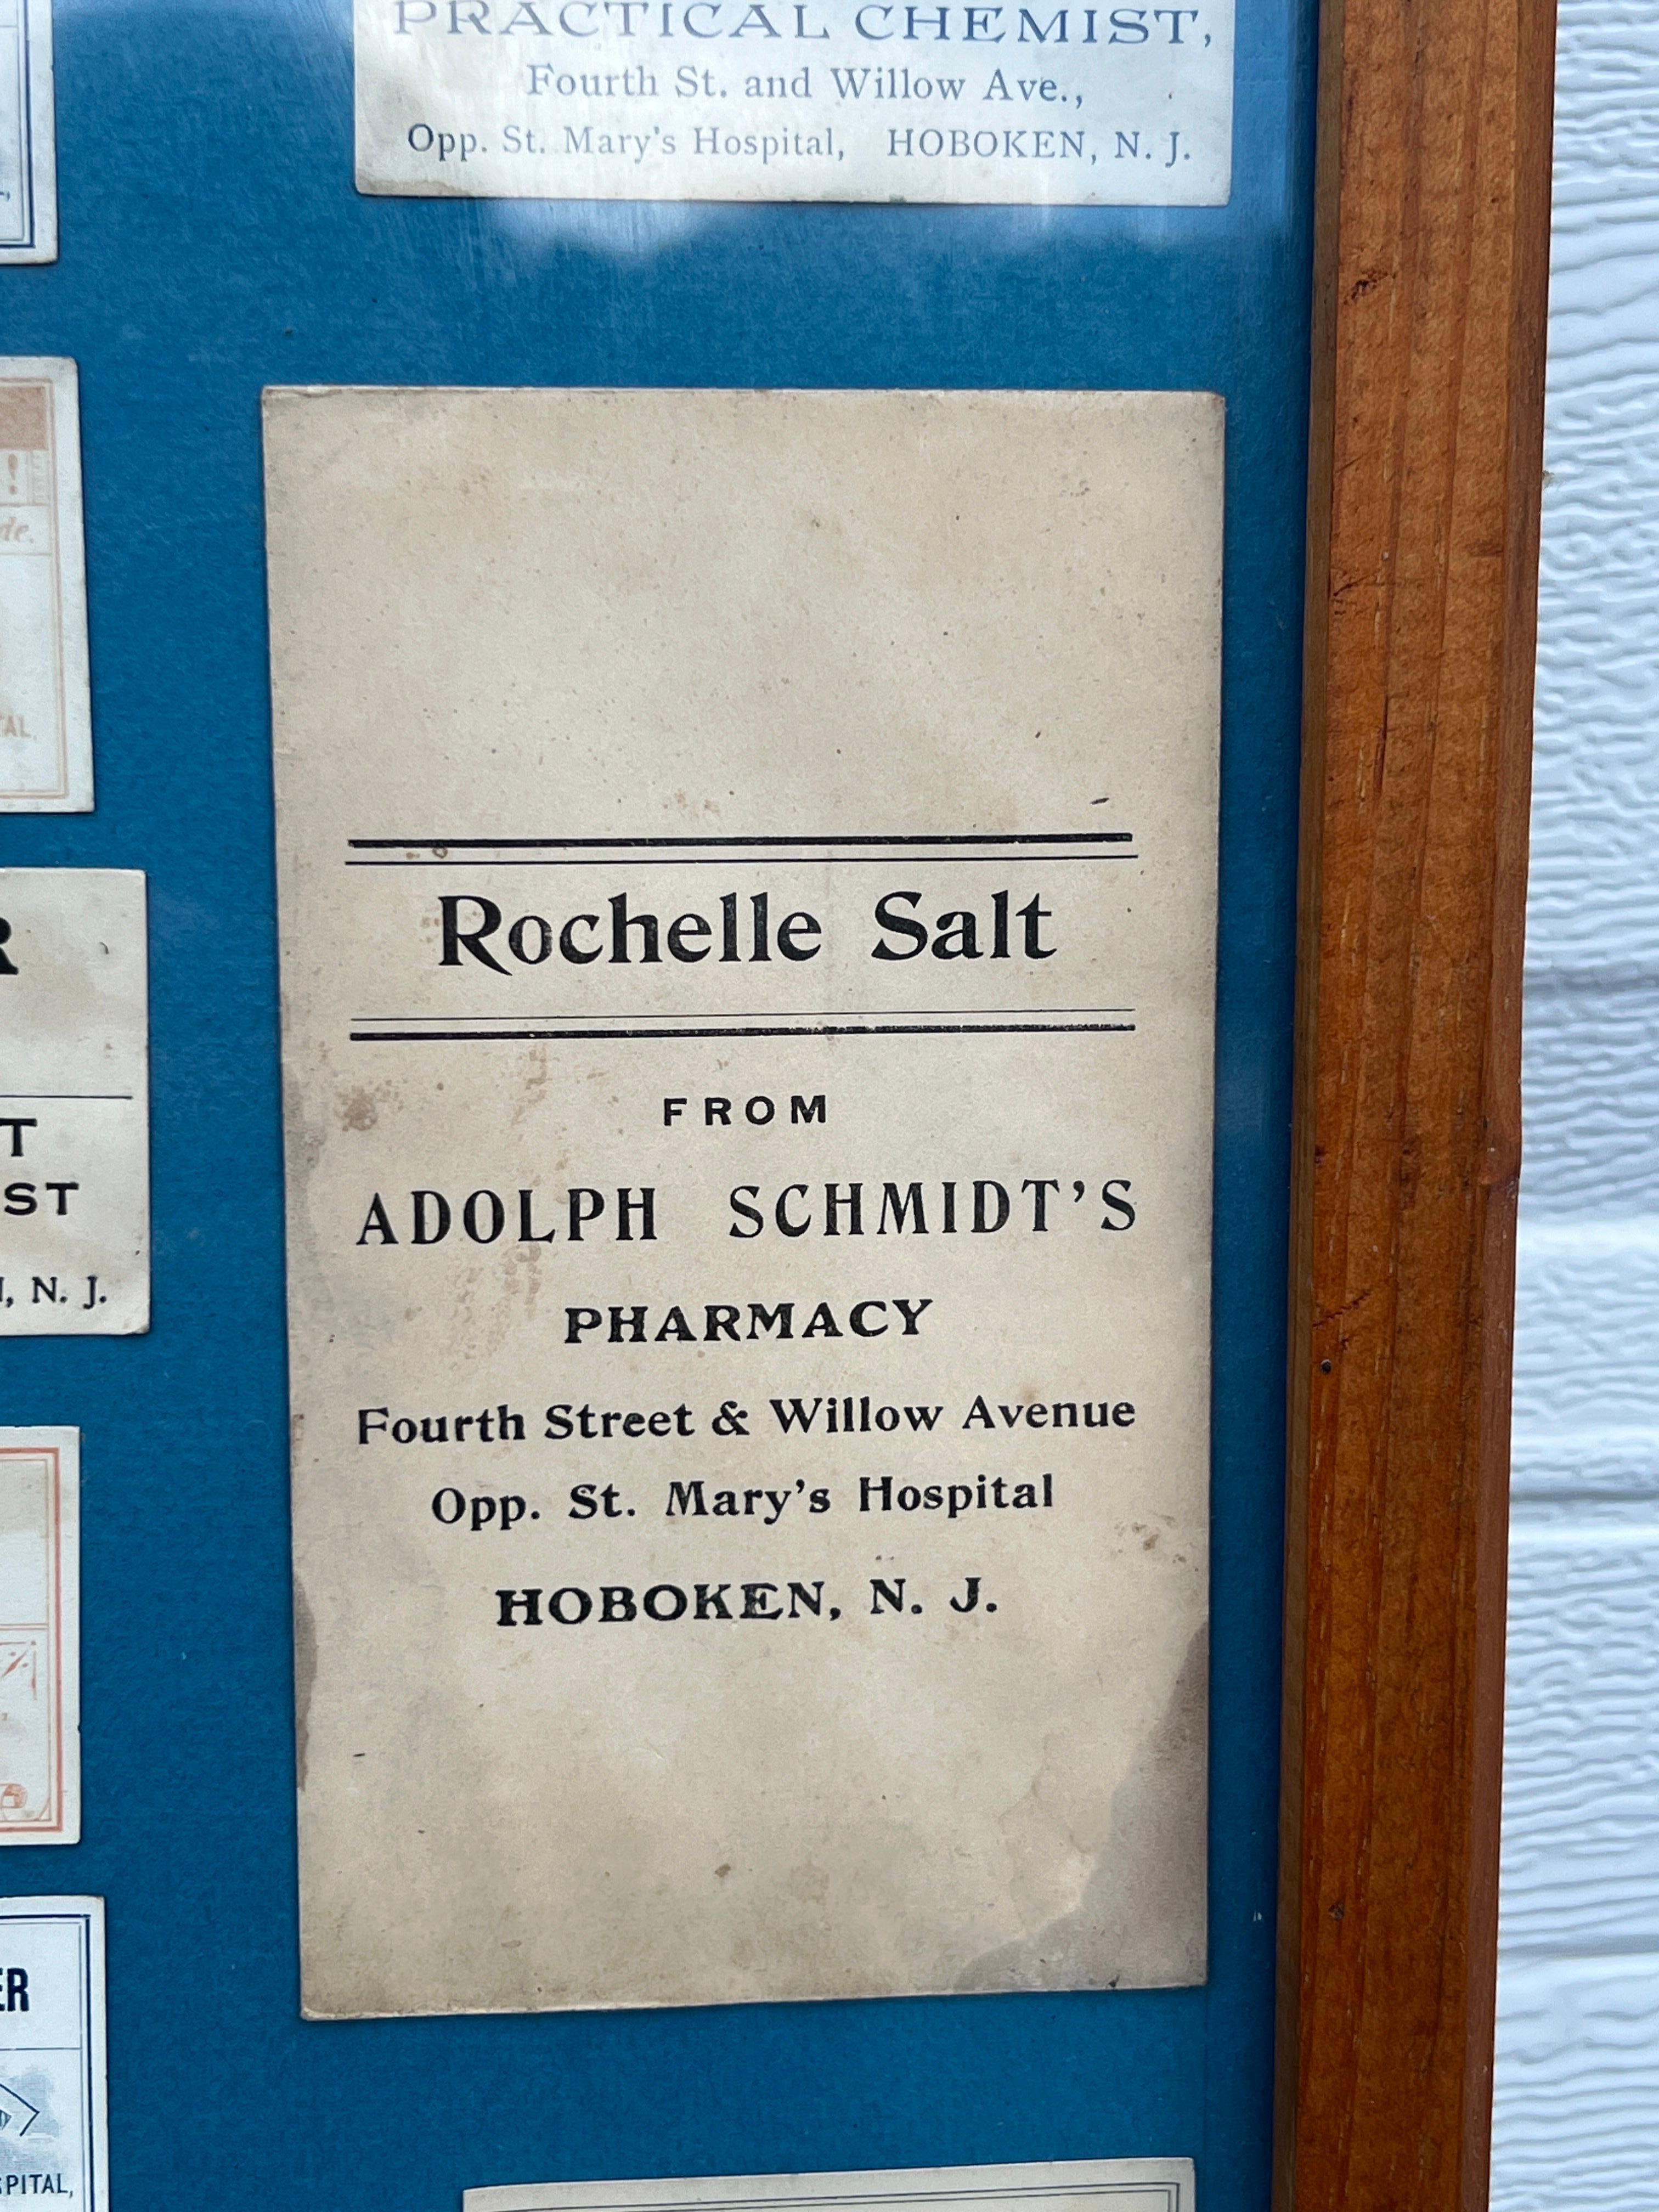 Rare Adolph Schmidt Pharmacy Label Display Including 110 Antique Labels For Sale 4